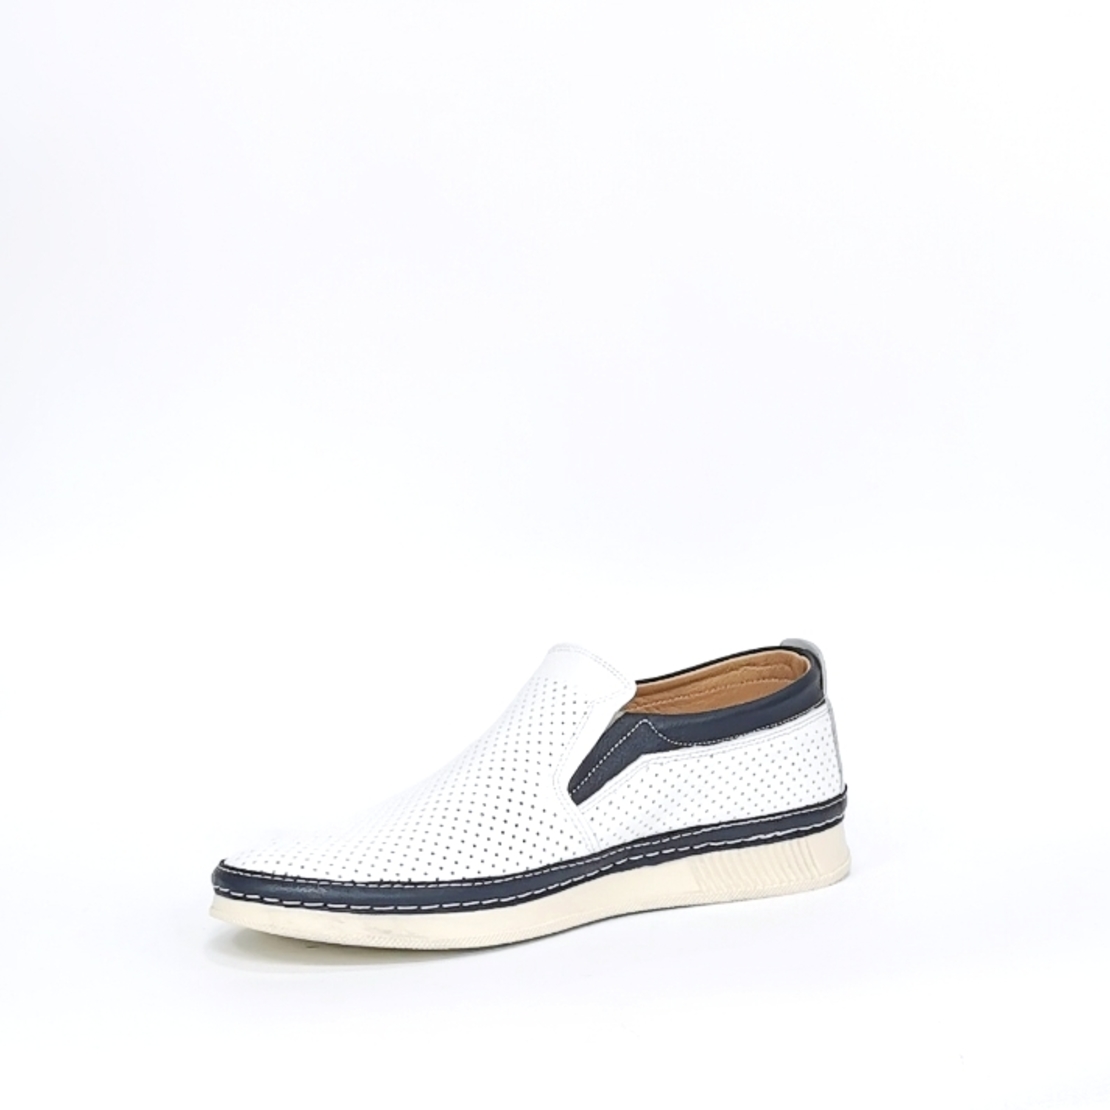 Men's casual shoes made of natural leather in white+blue color 7205